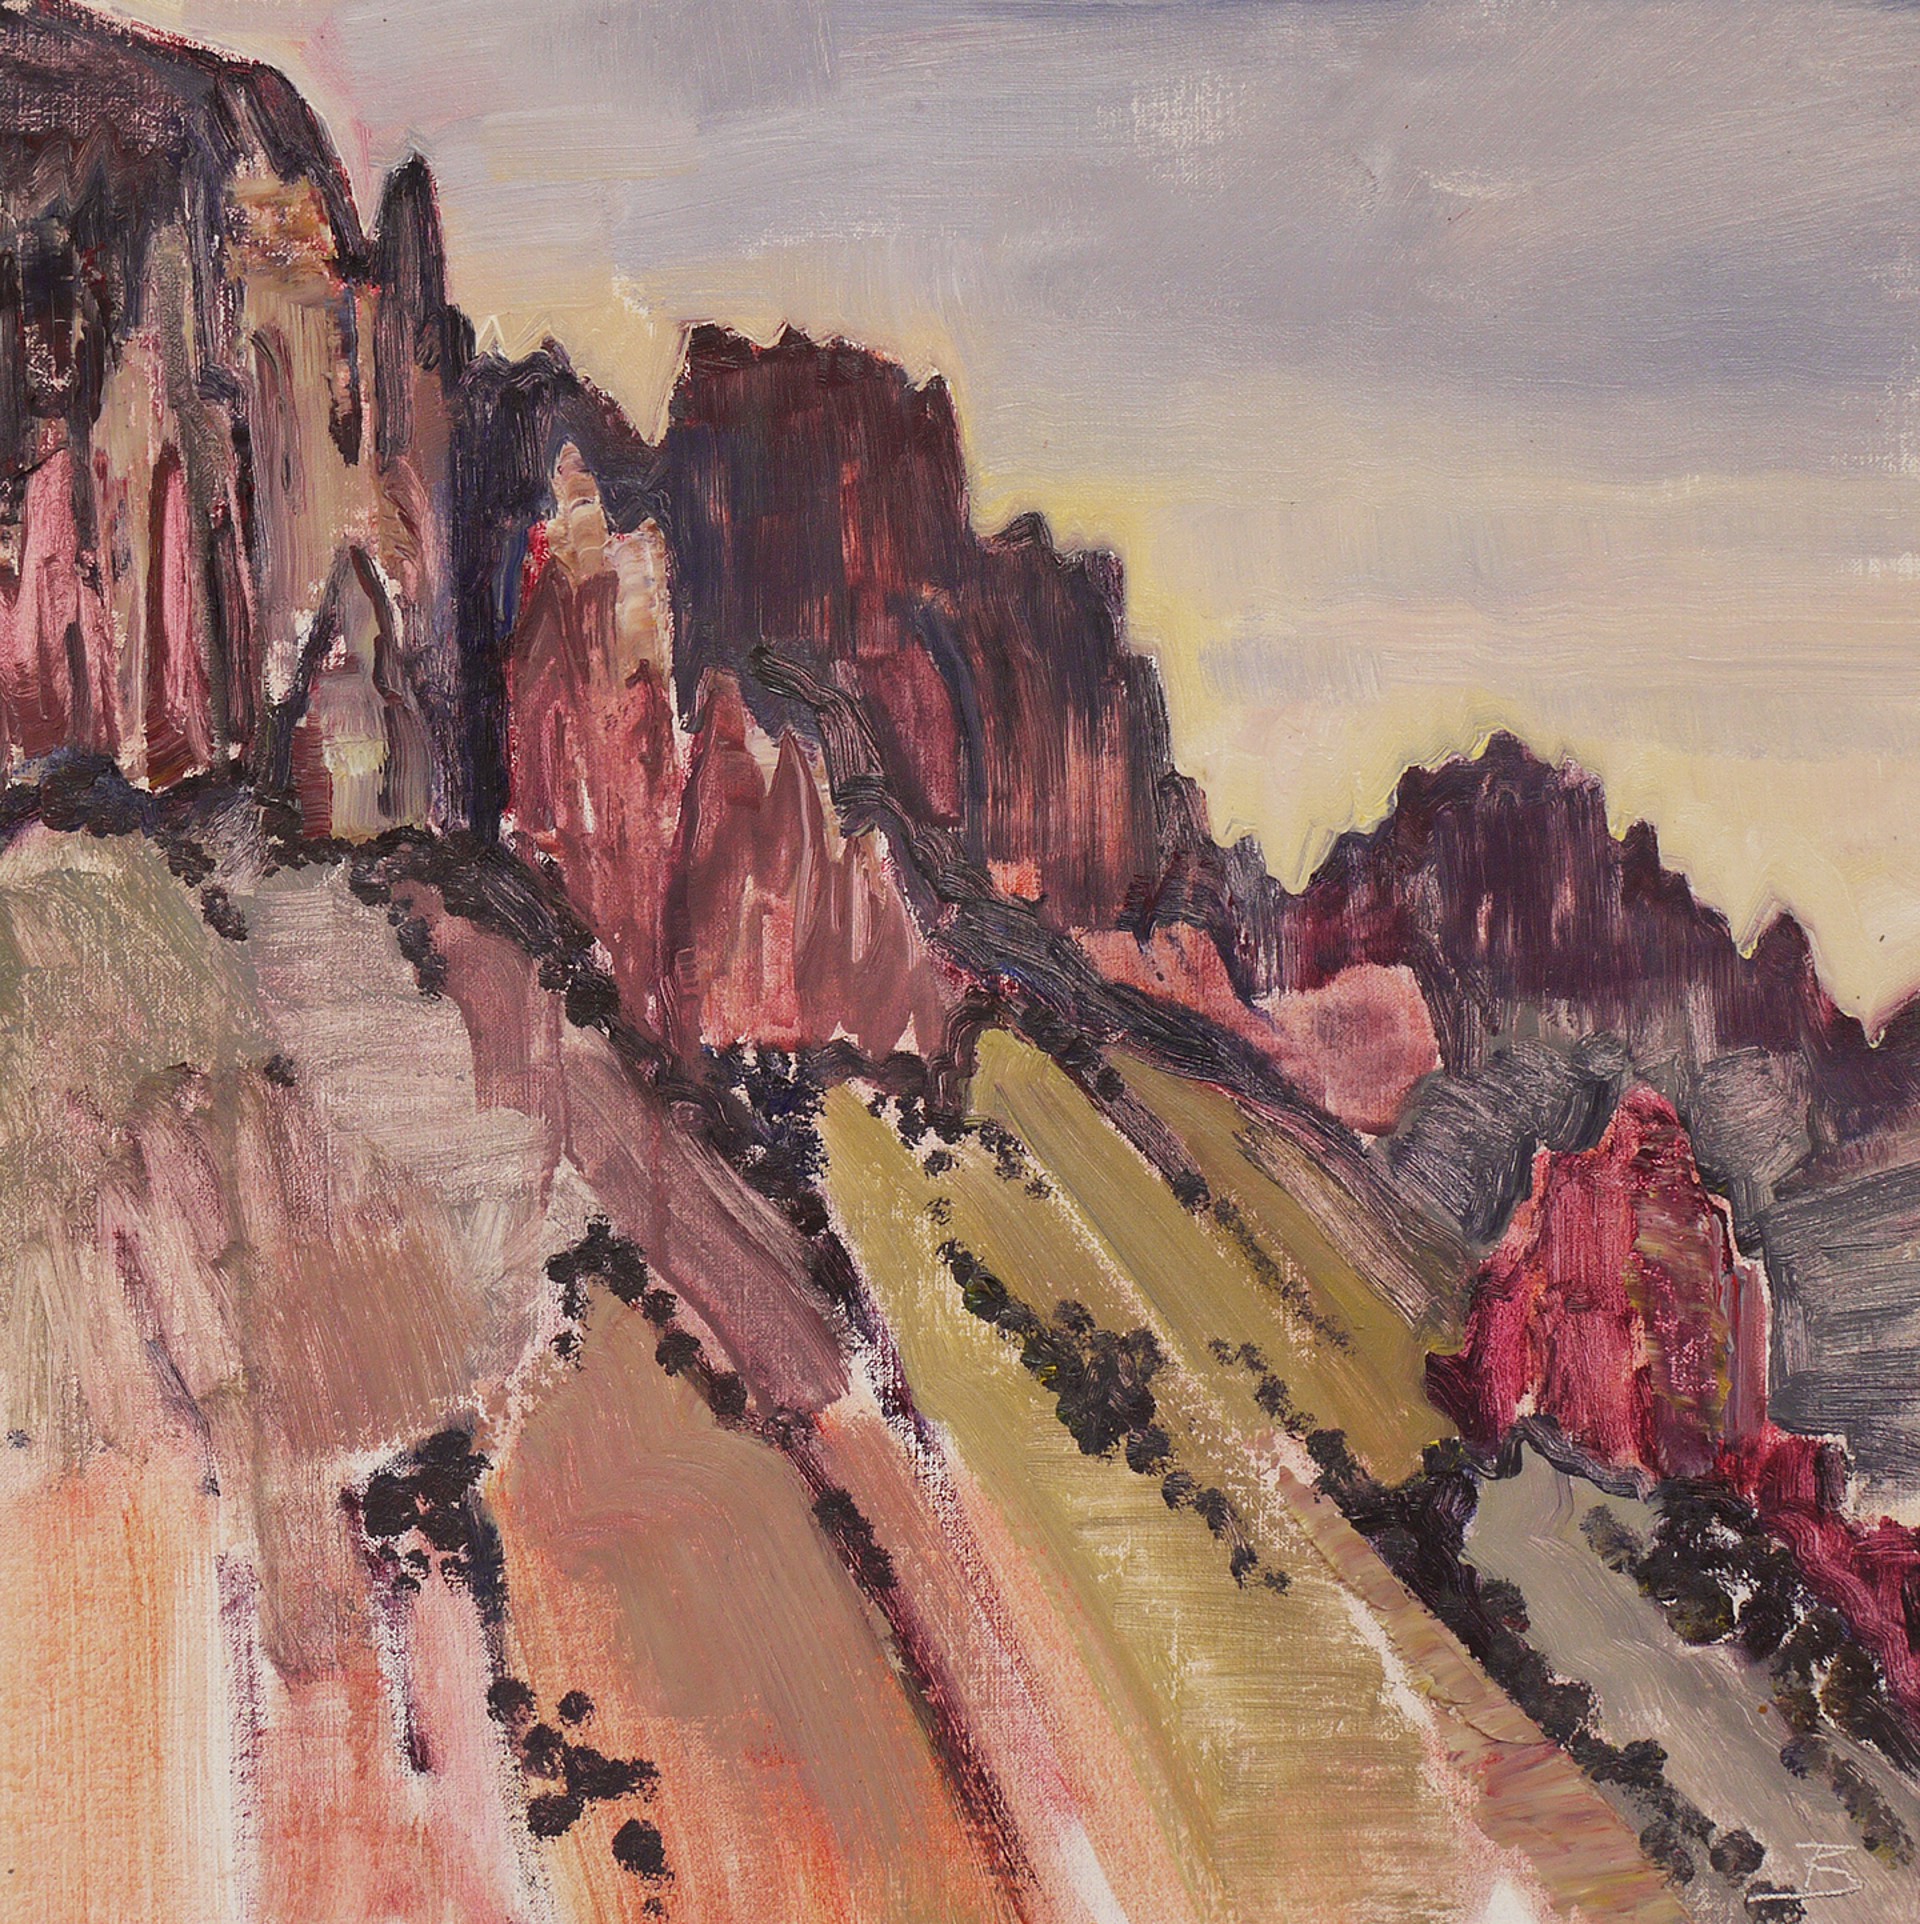 En Route to Chisos Basin by Mary Baxter